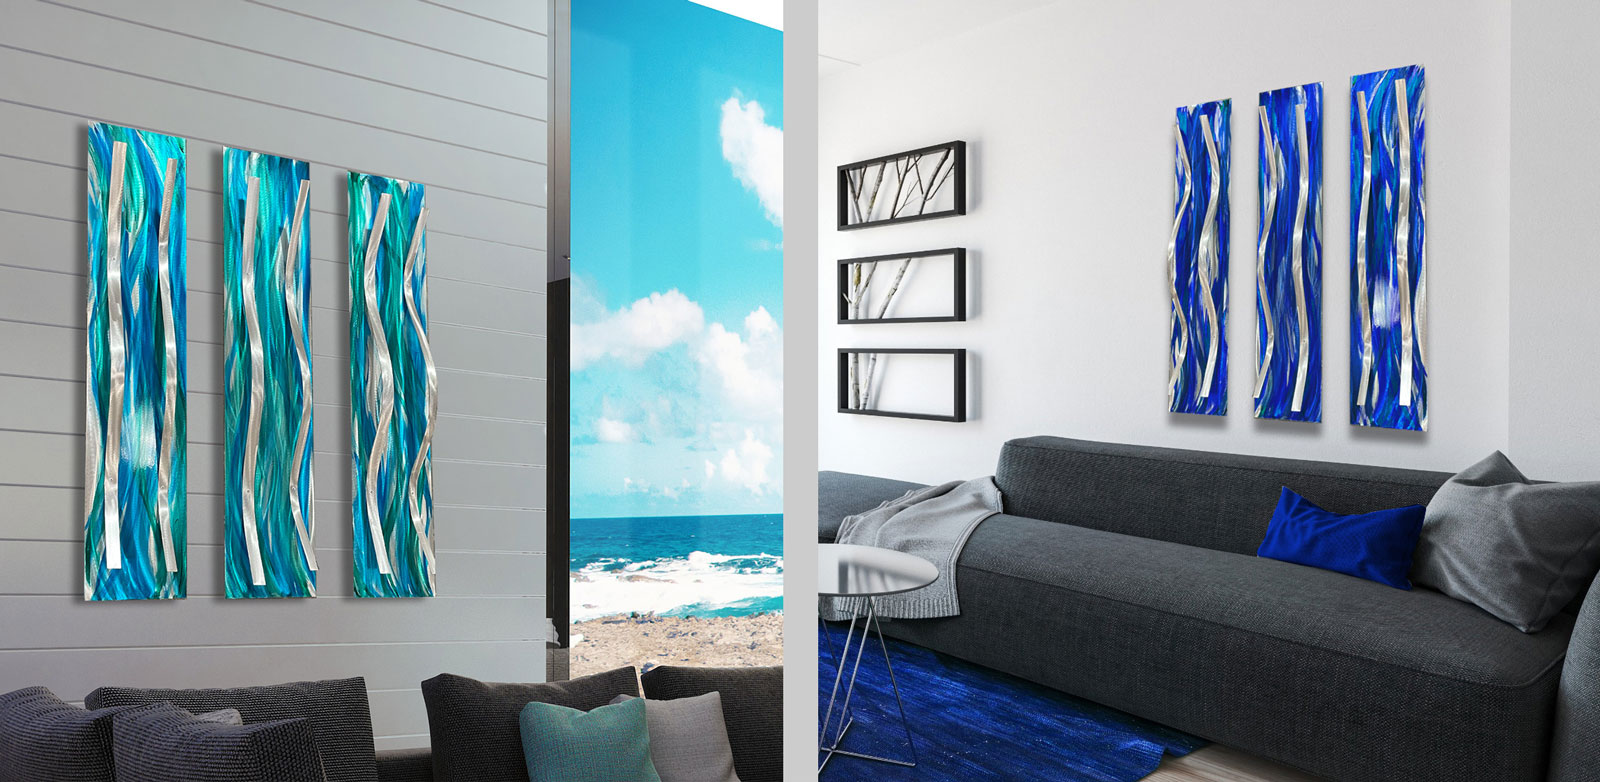 Tides Teal and Cobalt Blue Metal Abstract Wall Sculptures By Dustin Miller